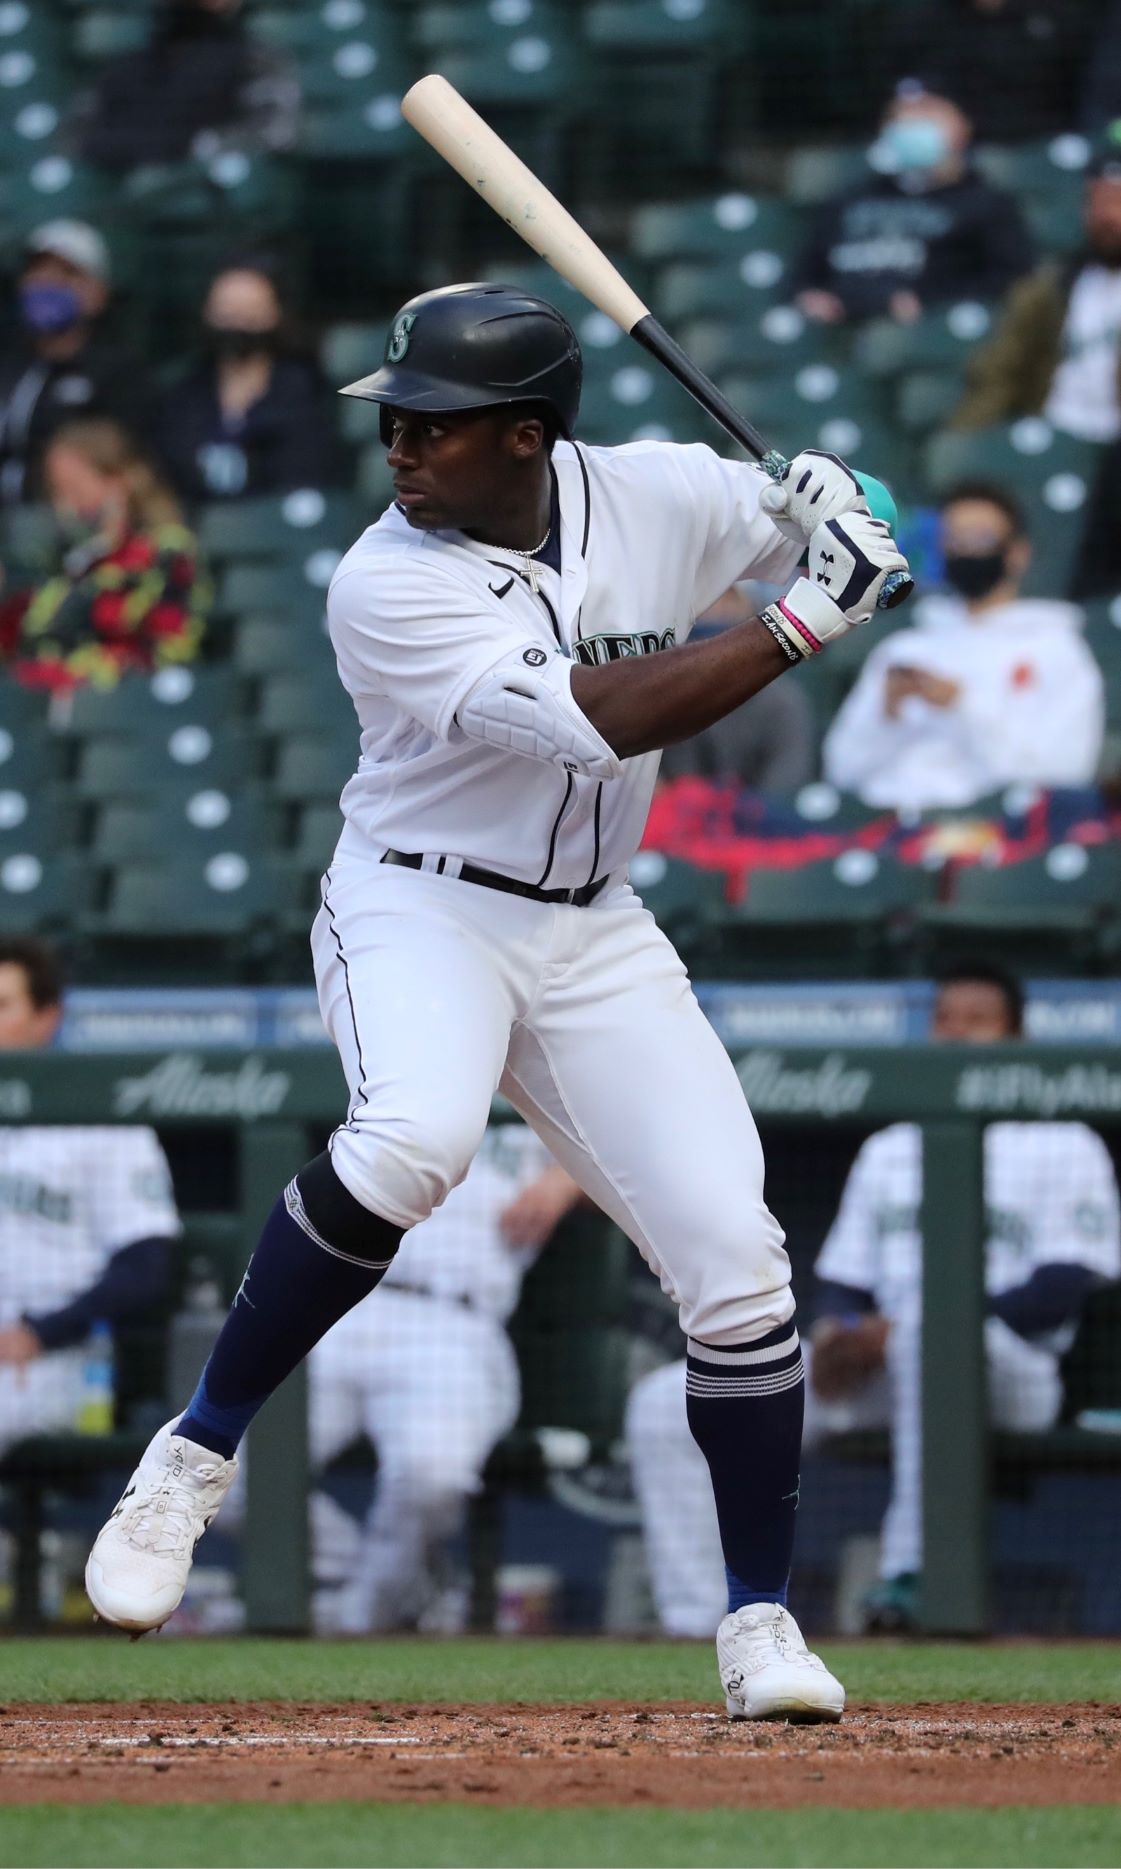 Taylor Trammell is an MLB outfielder